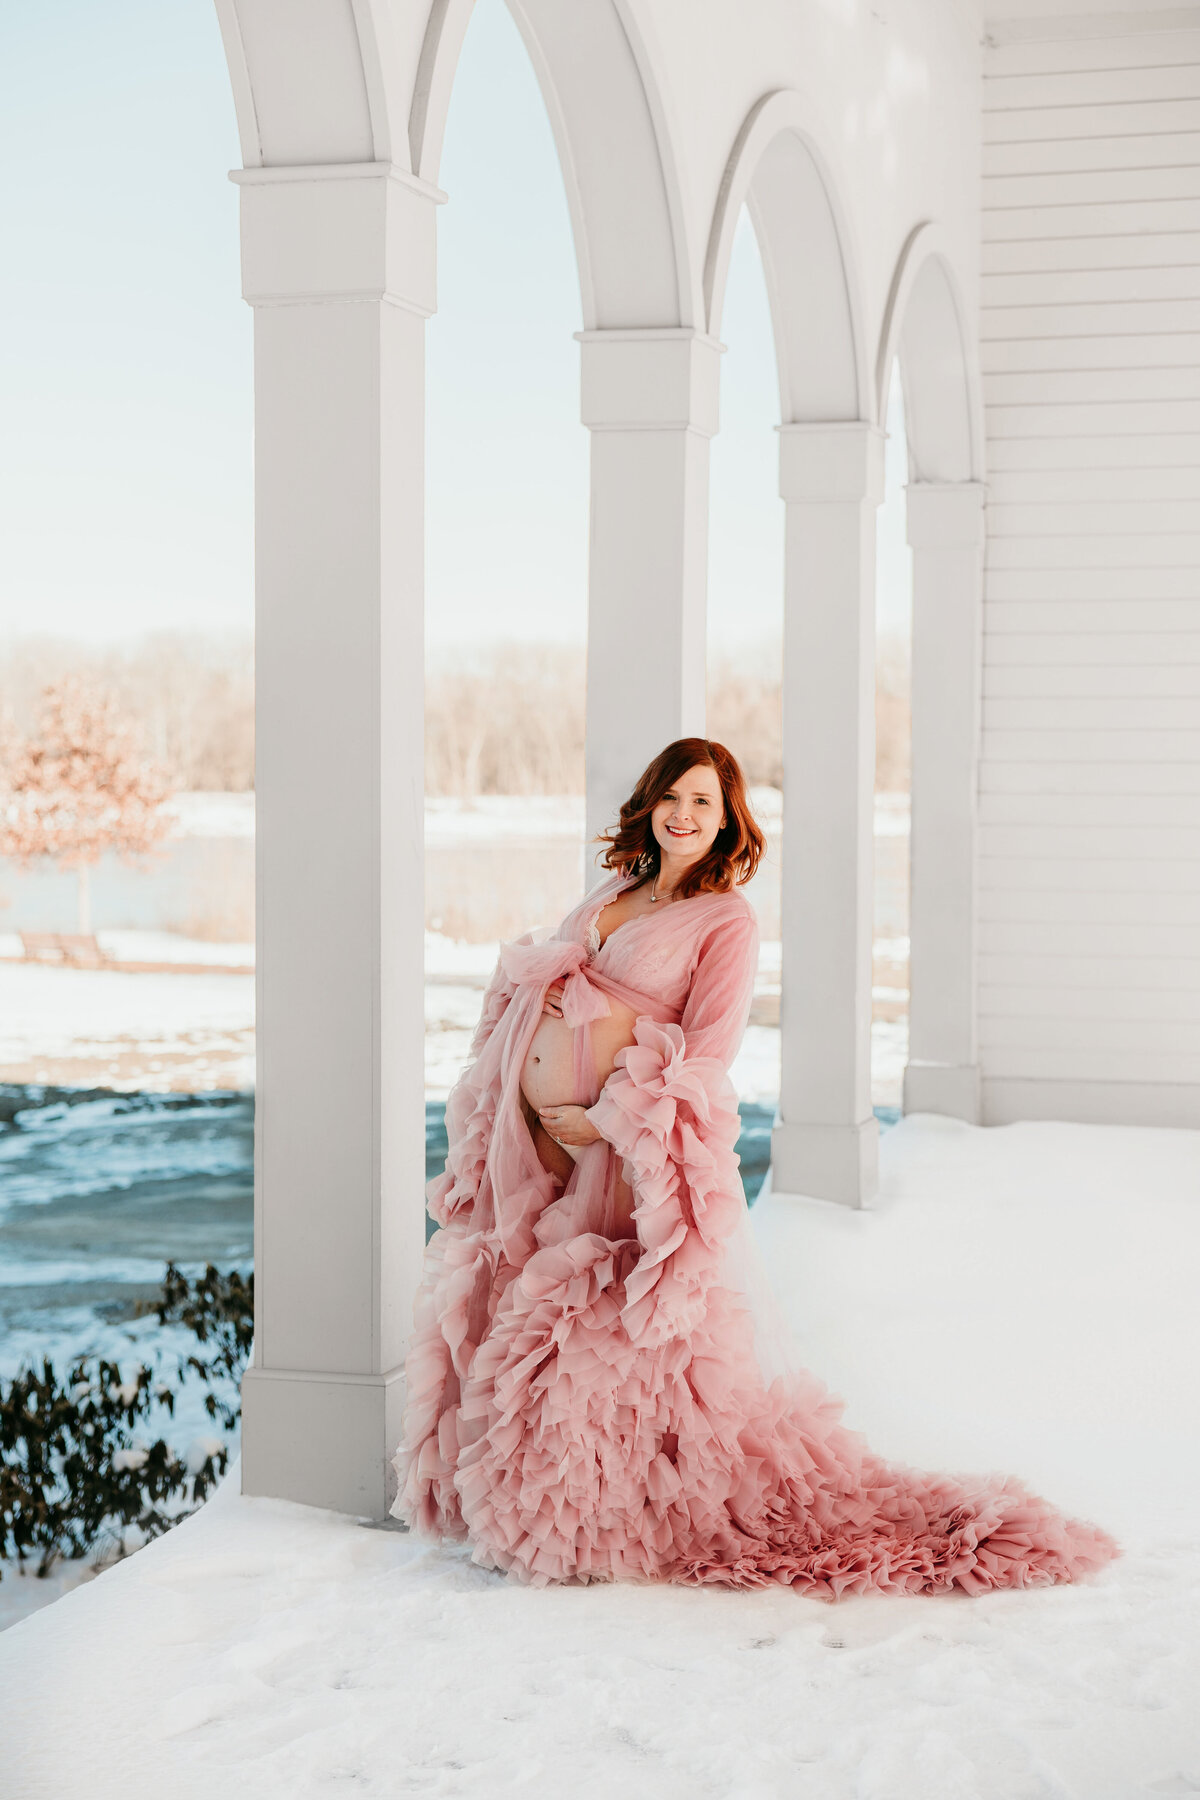 Pregnant mom stands in a snowy balcony wearing a flowy pink dress.